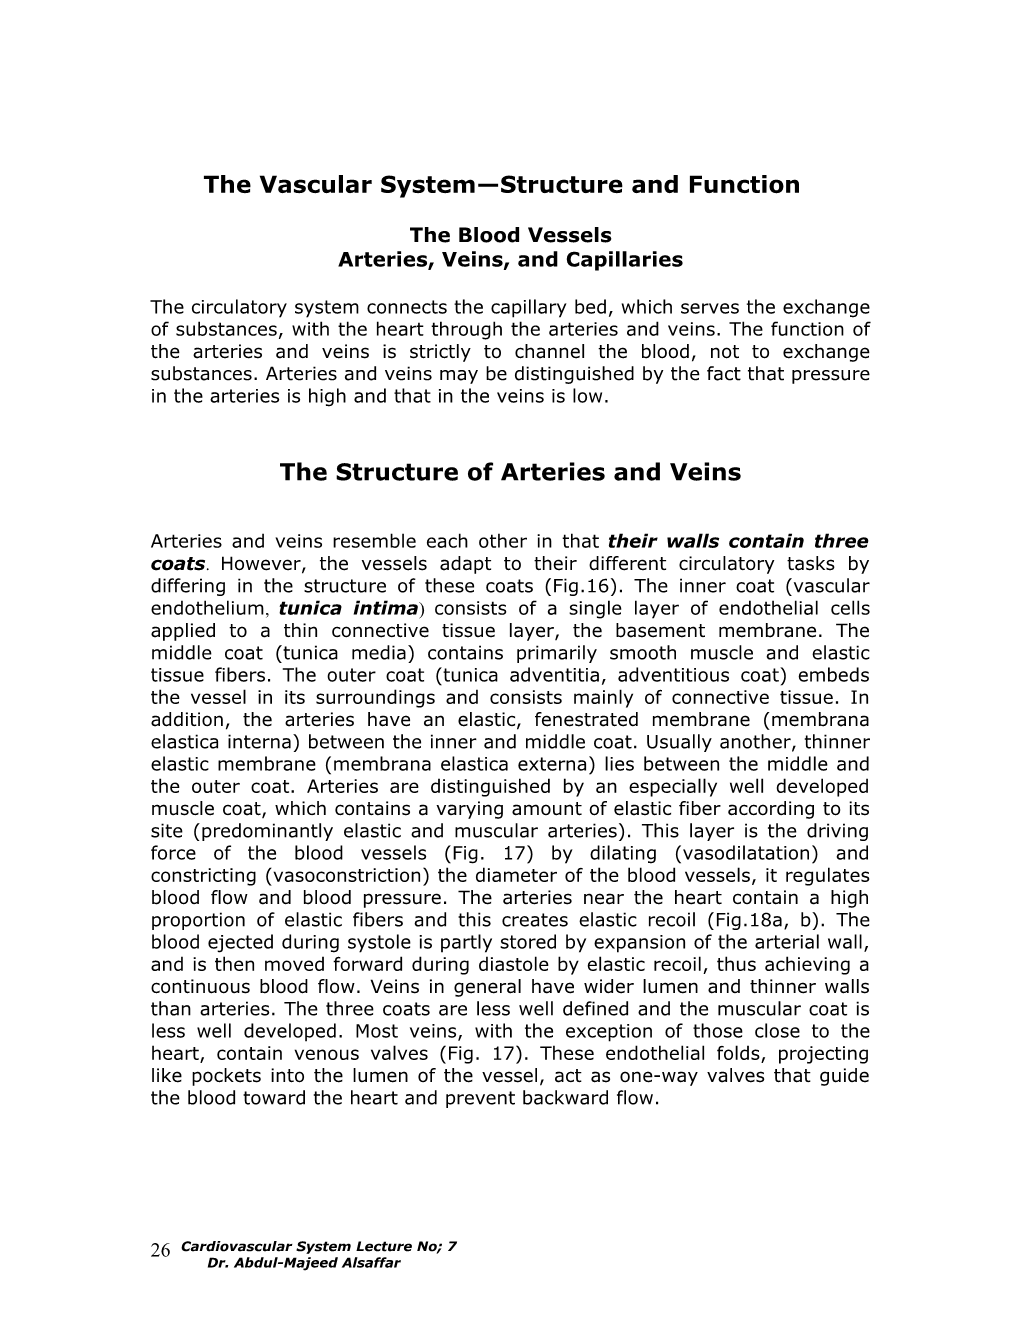 The Vascular System Structure and Function